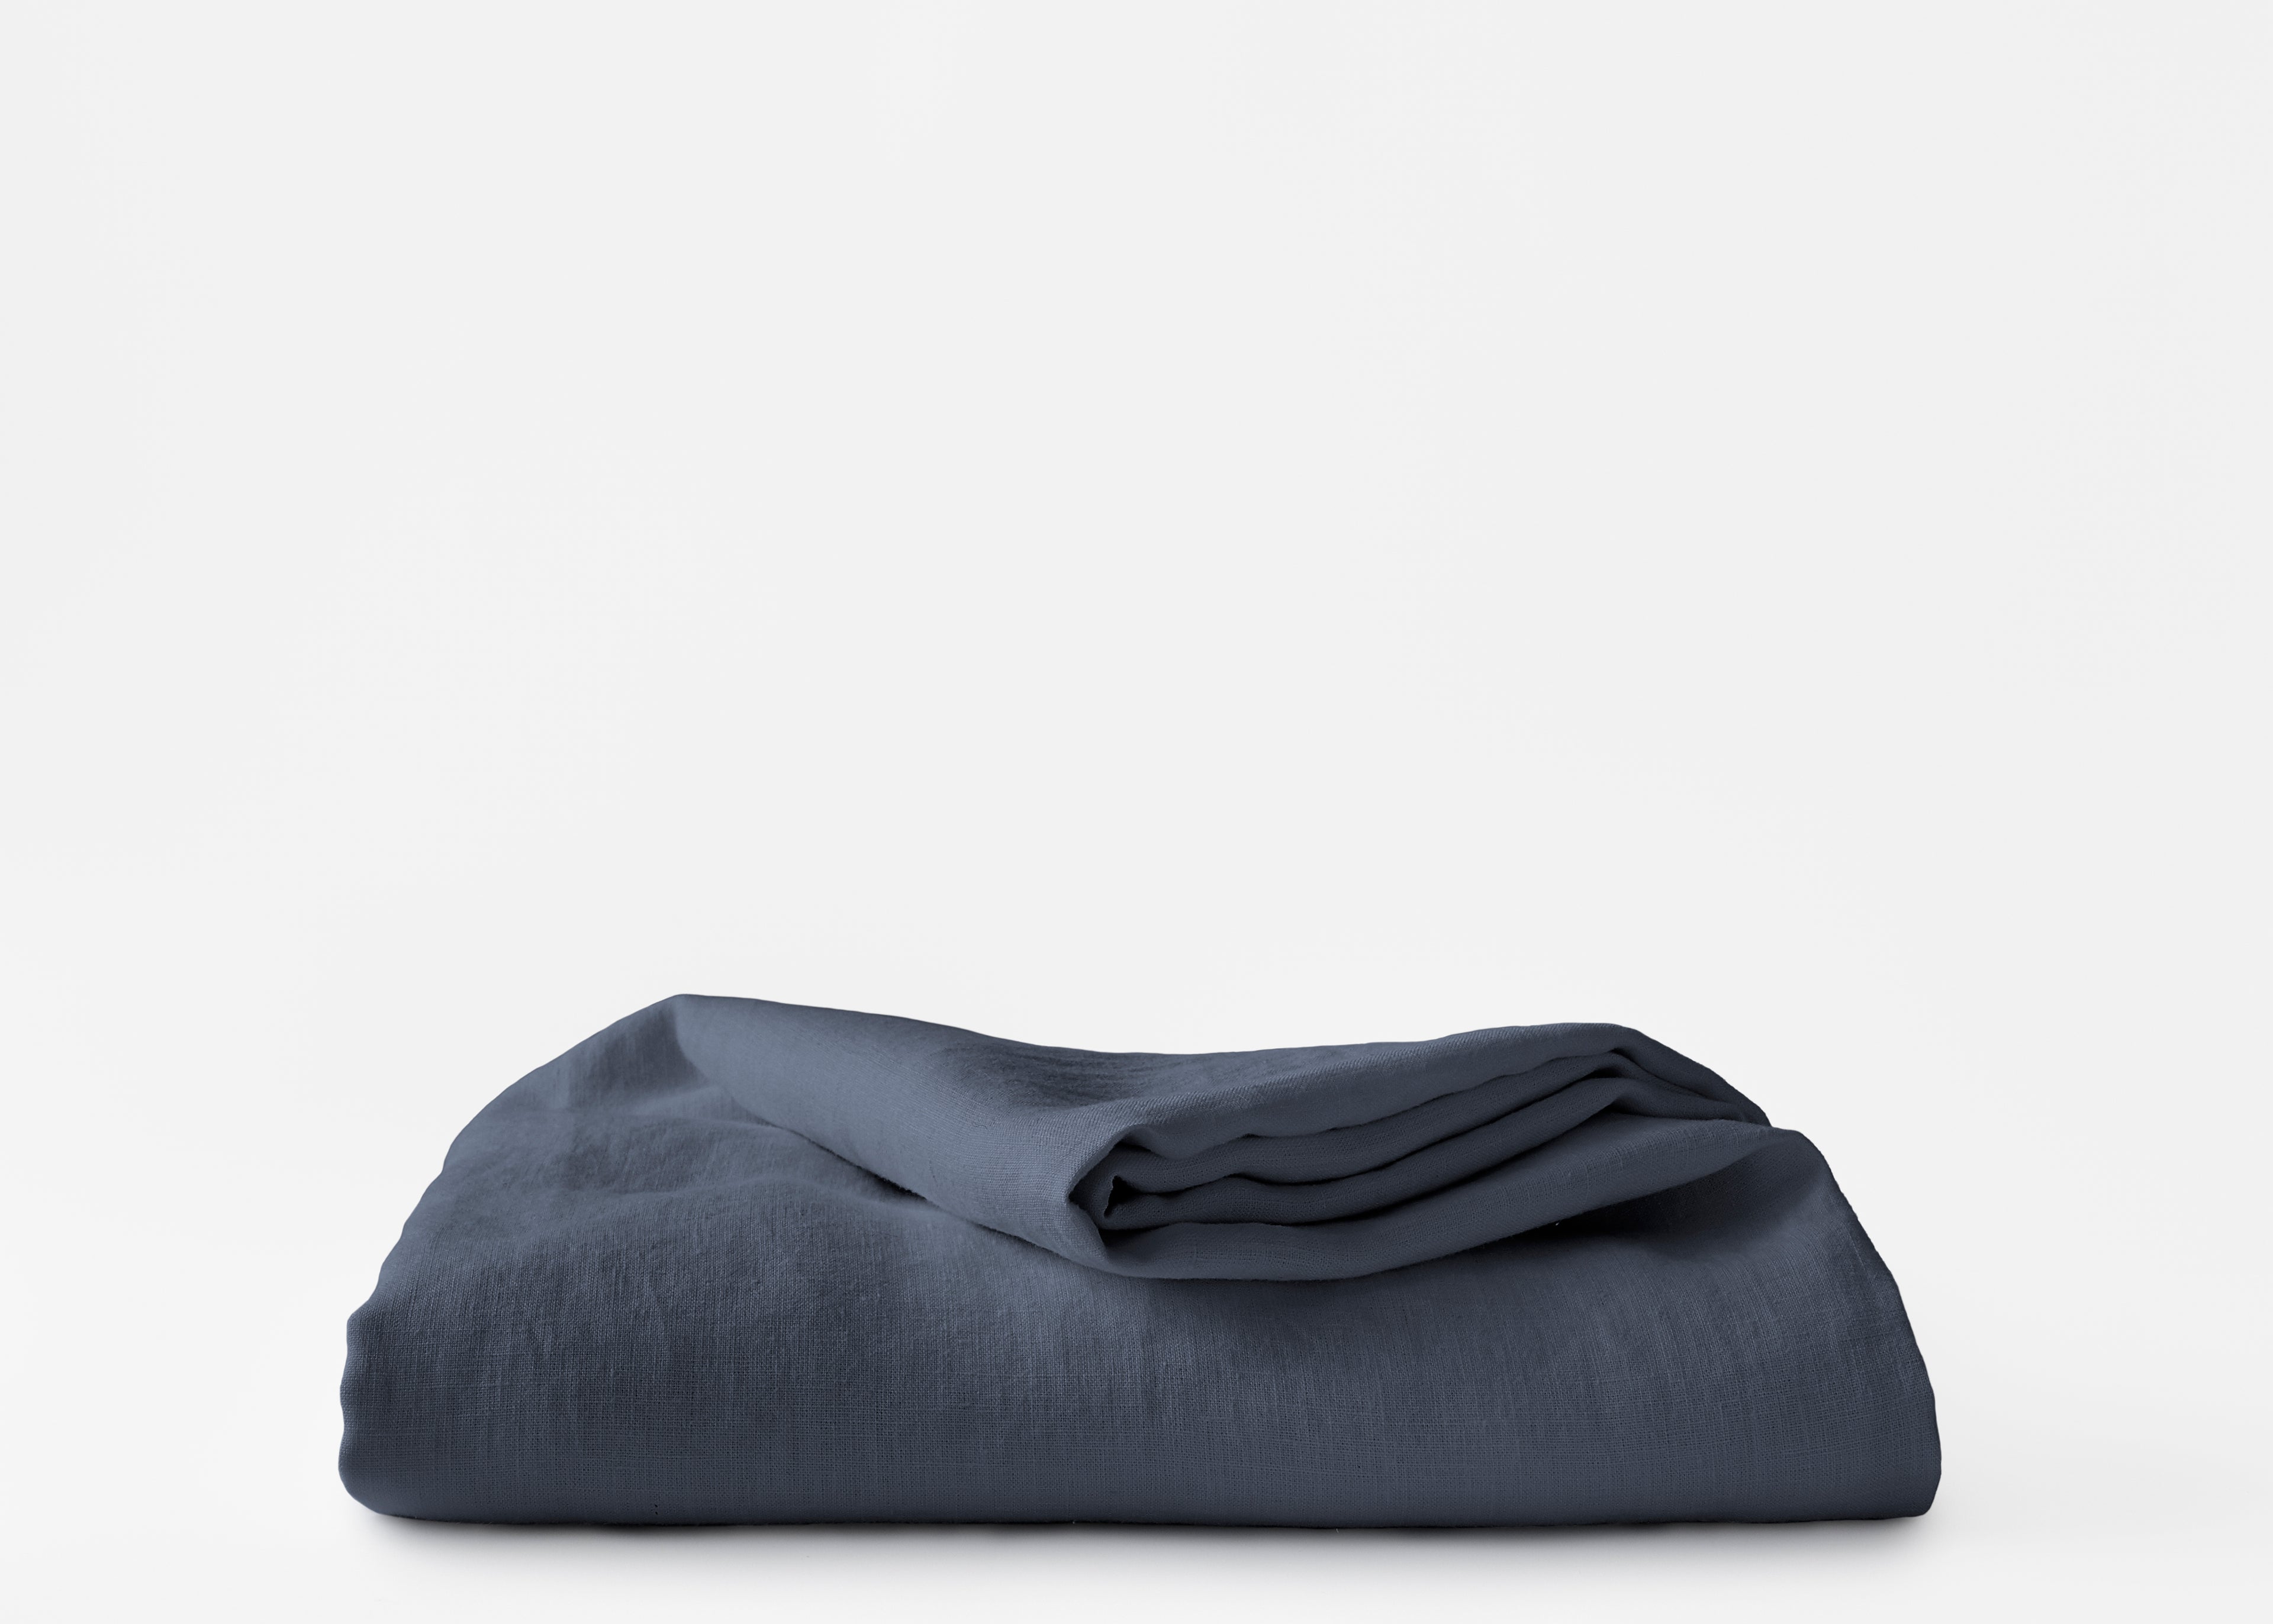 hemp duvet cover in a muted navy color